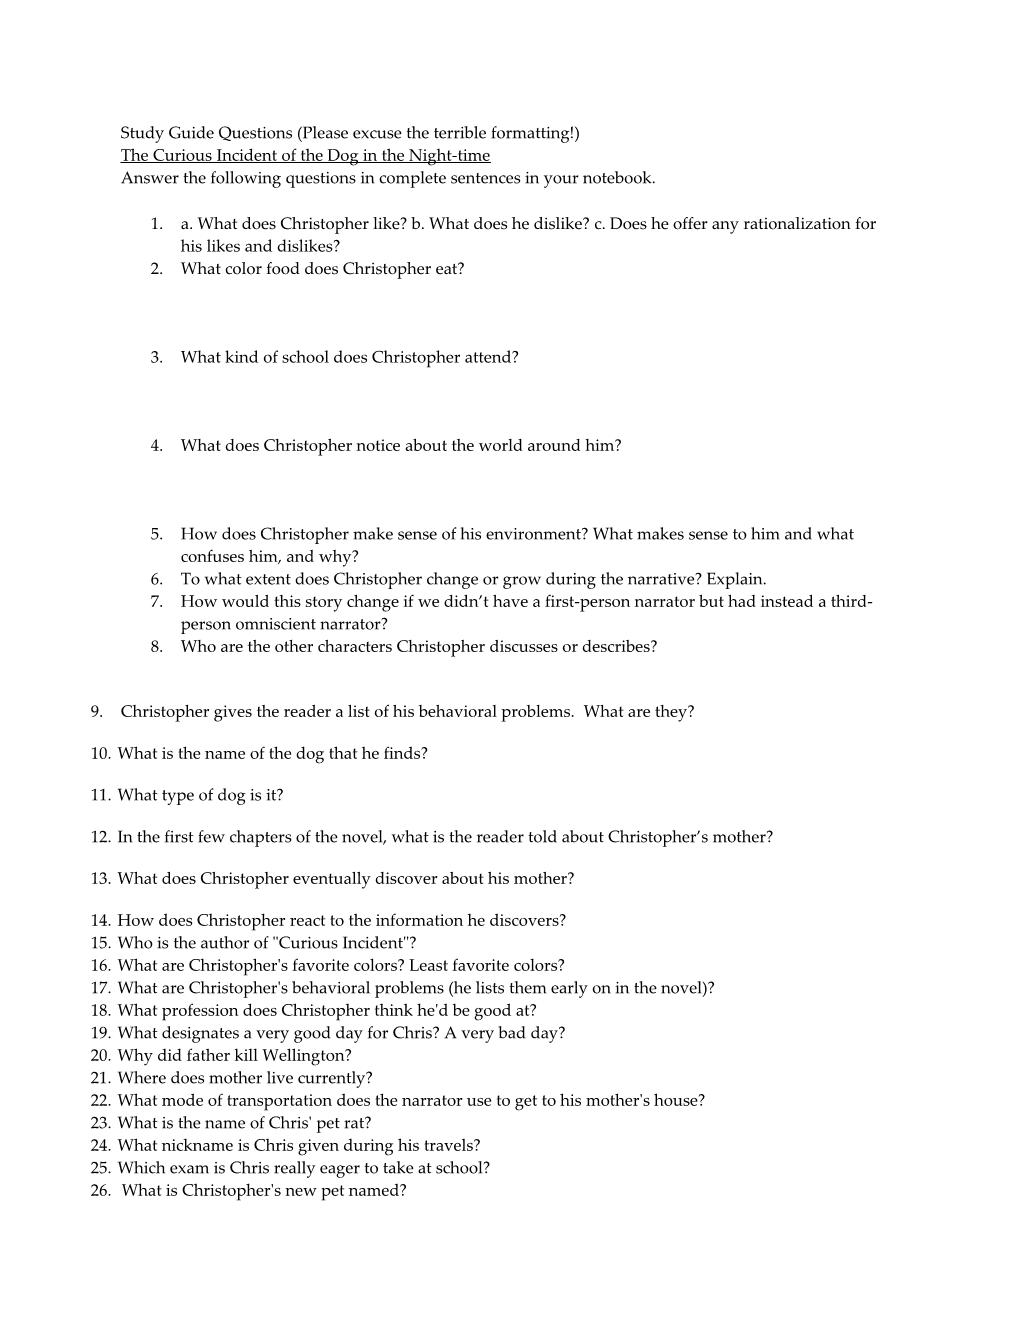 Study Guide Questions (Please Excuse the Terrible Formatting!)